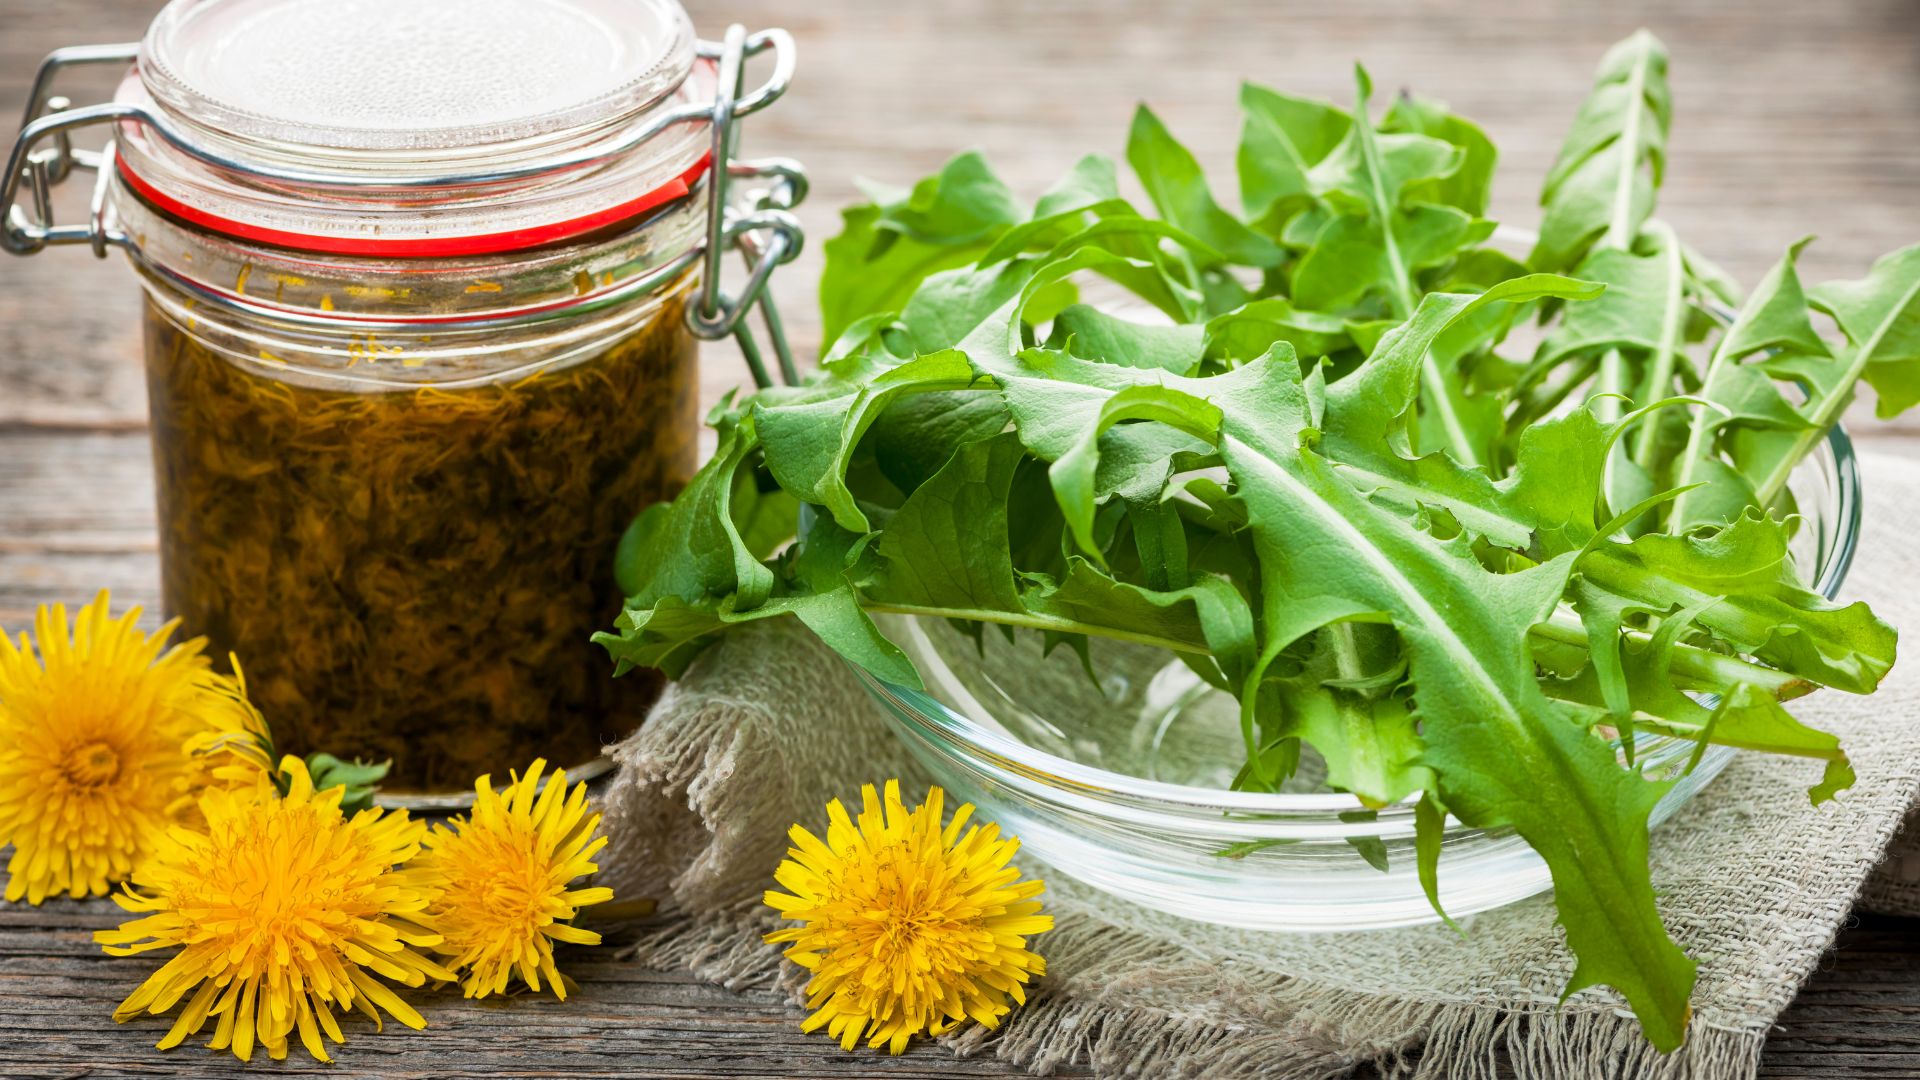 25 Ingenious Ways You Can Use Dandelions Instead Of Throwing Them Away 